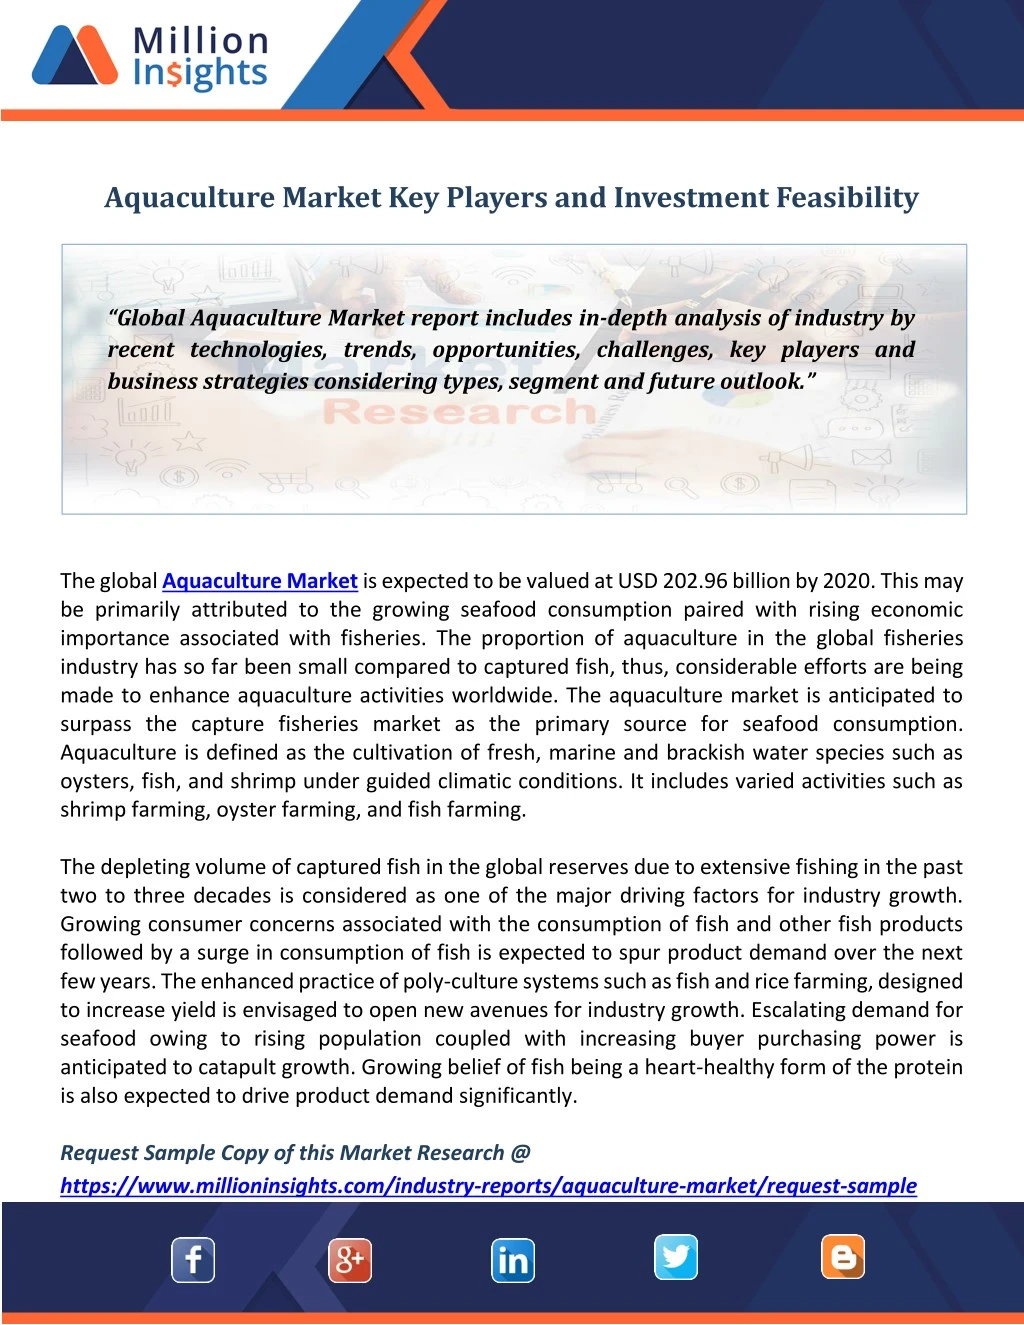 aquaculture market key players and investment